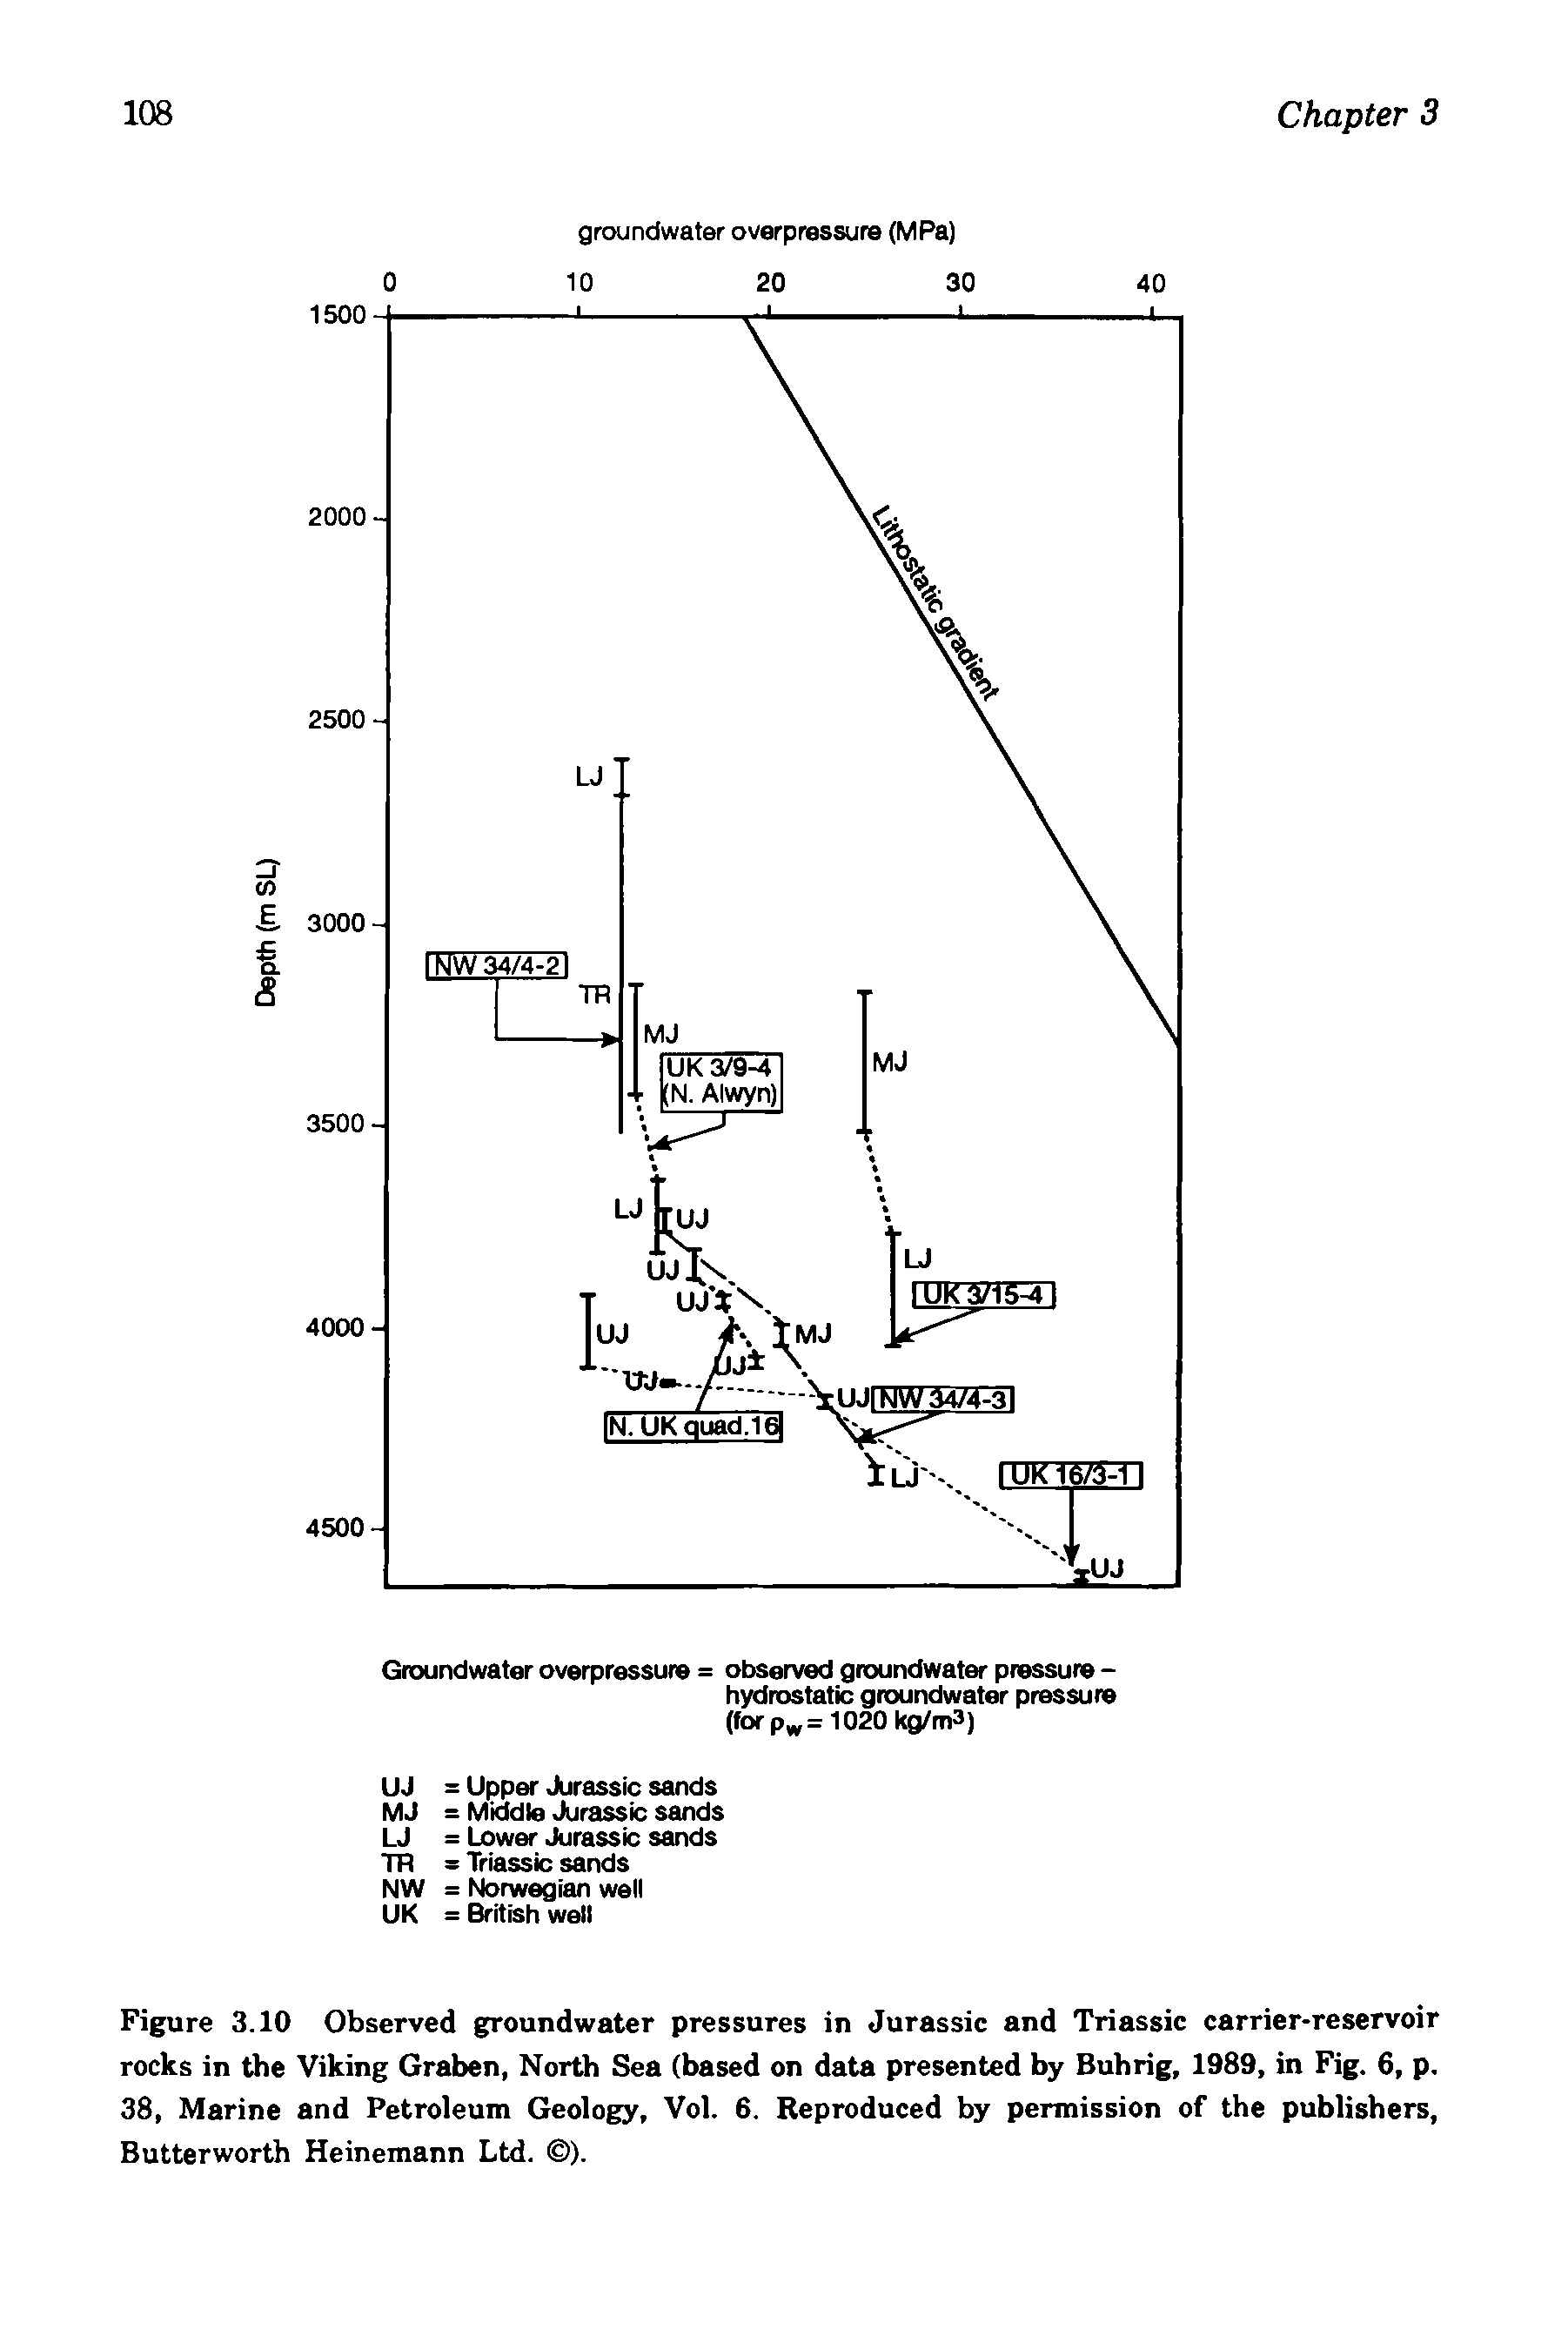 Figure 3.10 Observed groundwater pressures in Jurassic and Triassic carrier-reservoir rocks in the Viking Graben, North Sea (based on data presented by Buhrig, 1989, in Fig. 6, p, 38, Marine and Petroleum Geology, Vol. 6. Reproduced by permission of the publishers, Butterworth Heinemann Ltd. ).